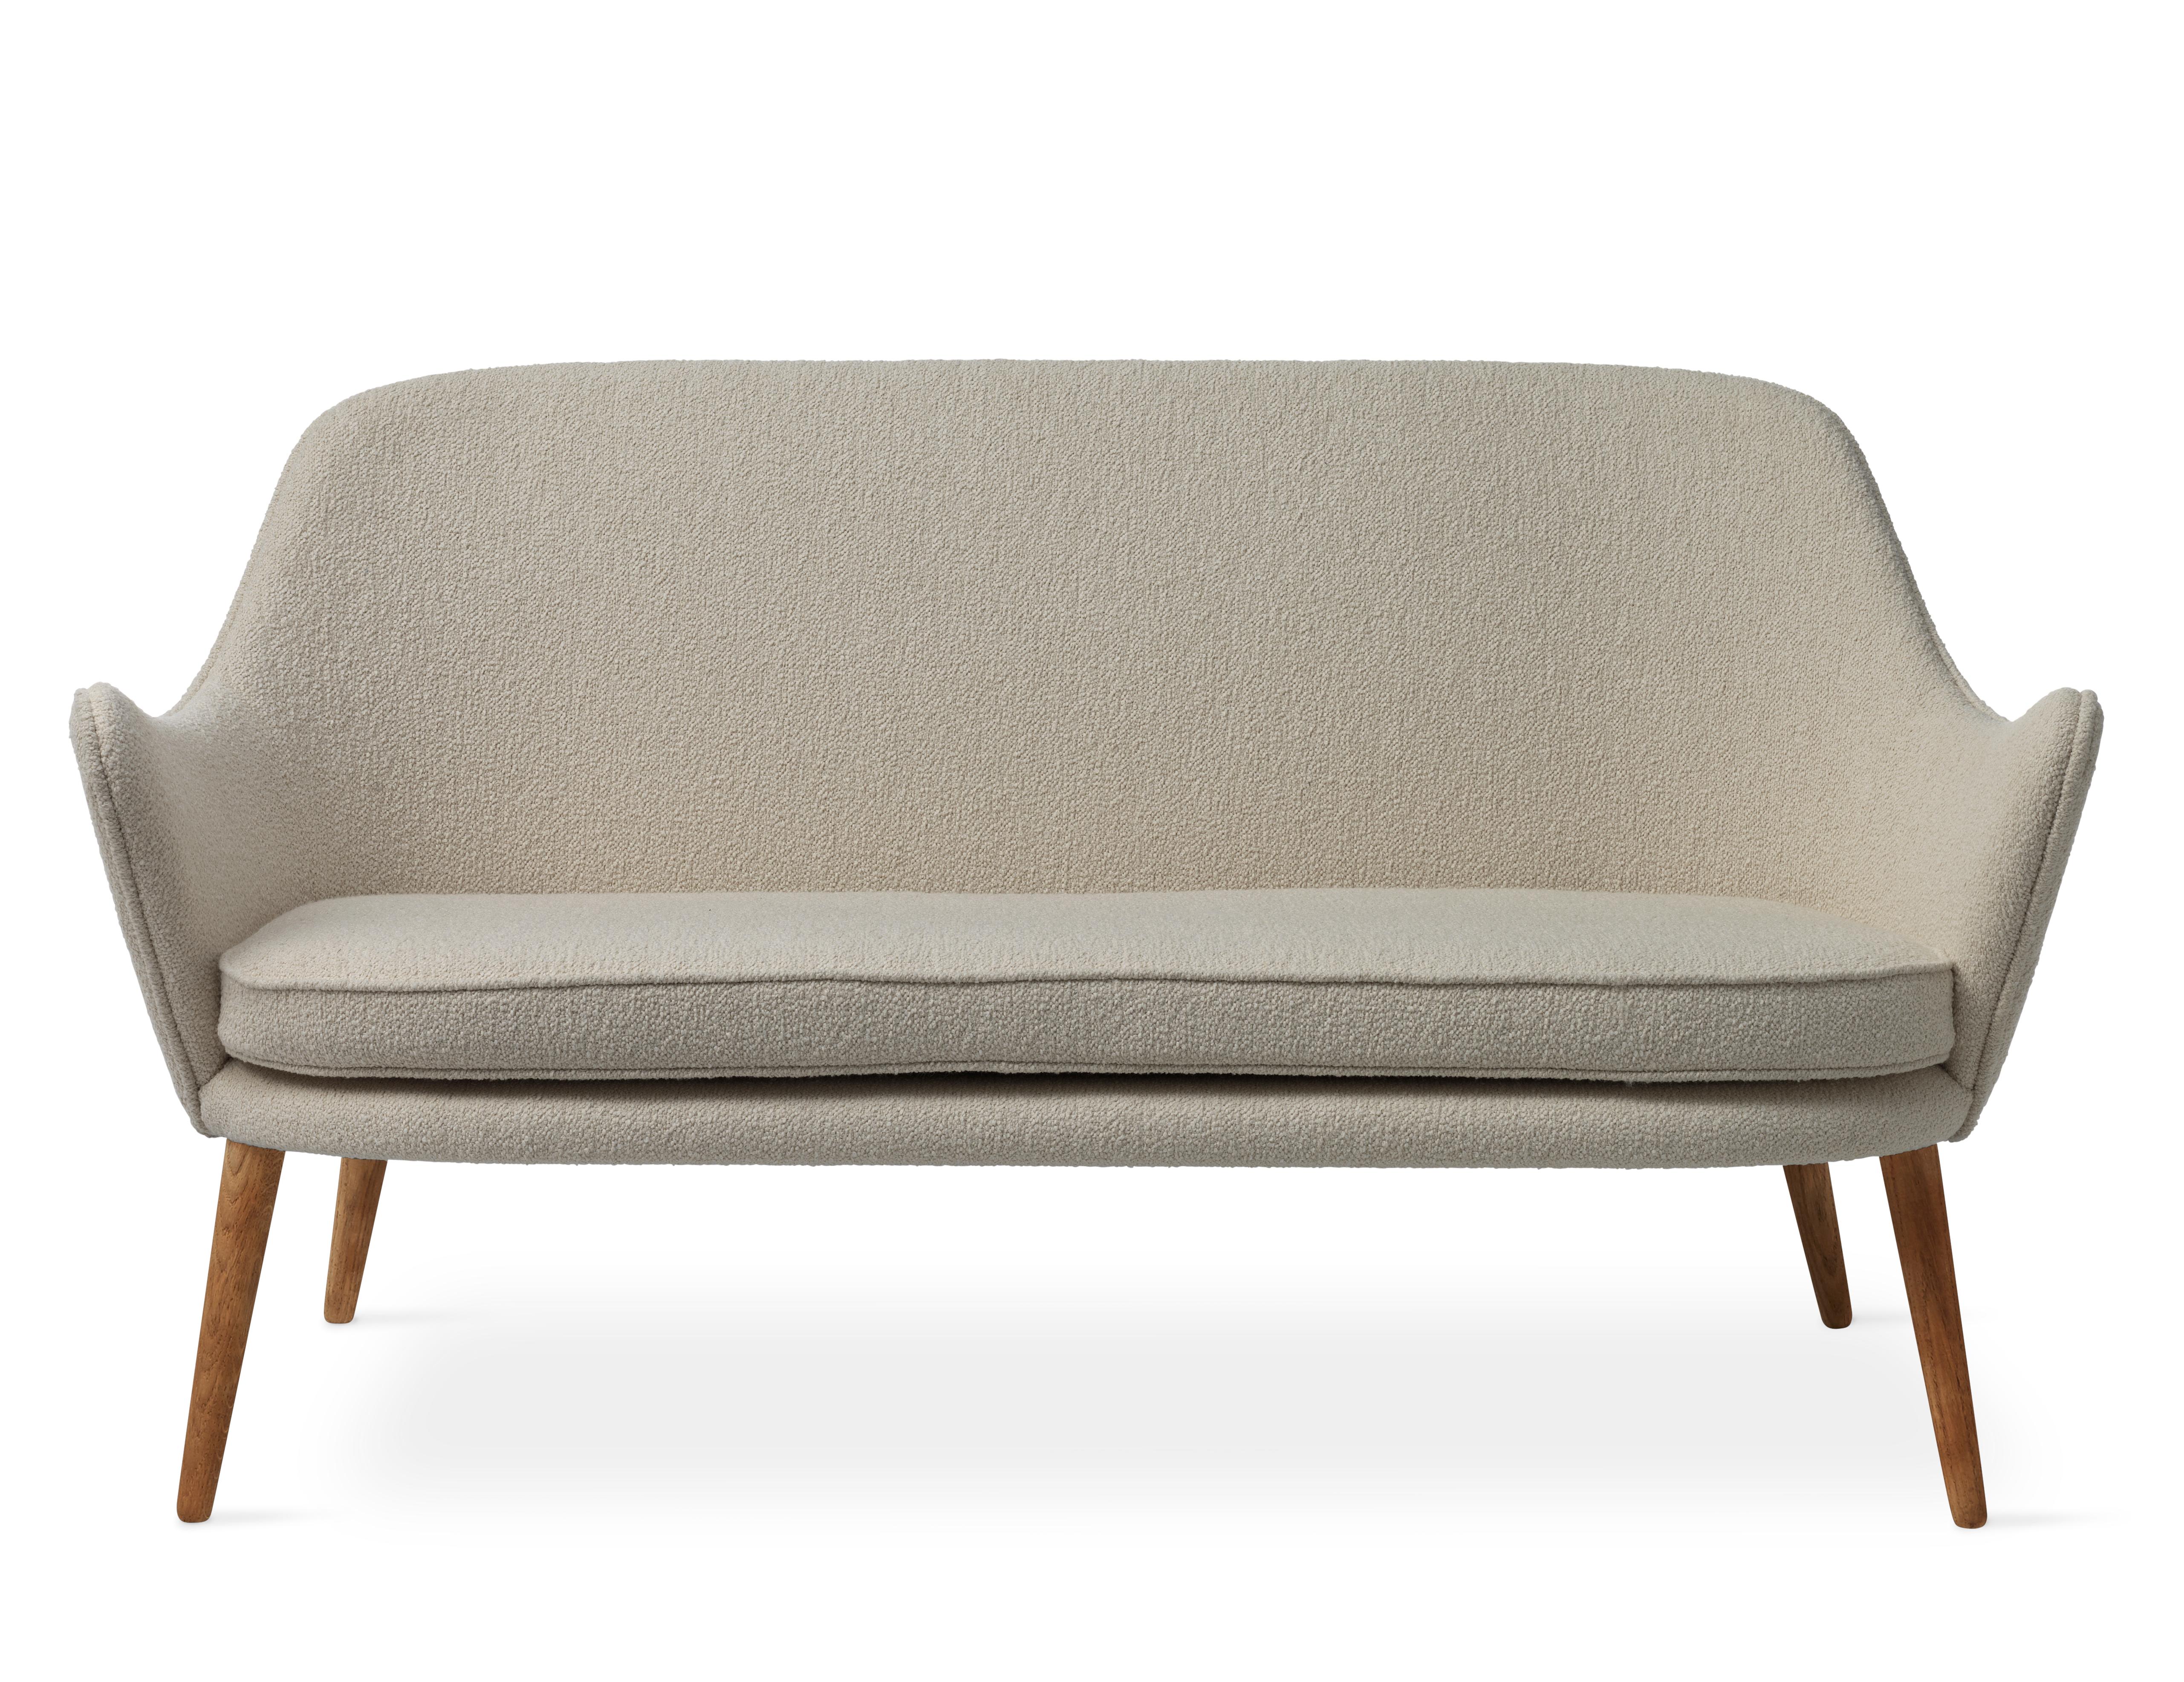 For Sale: Pink (Hero 511) Dwell 2-Seat Sofa, by Hans Olsen from Warm Nordic